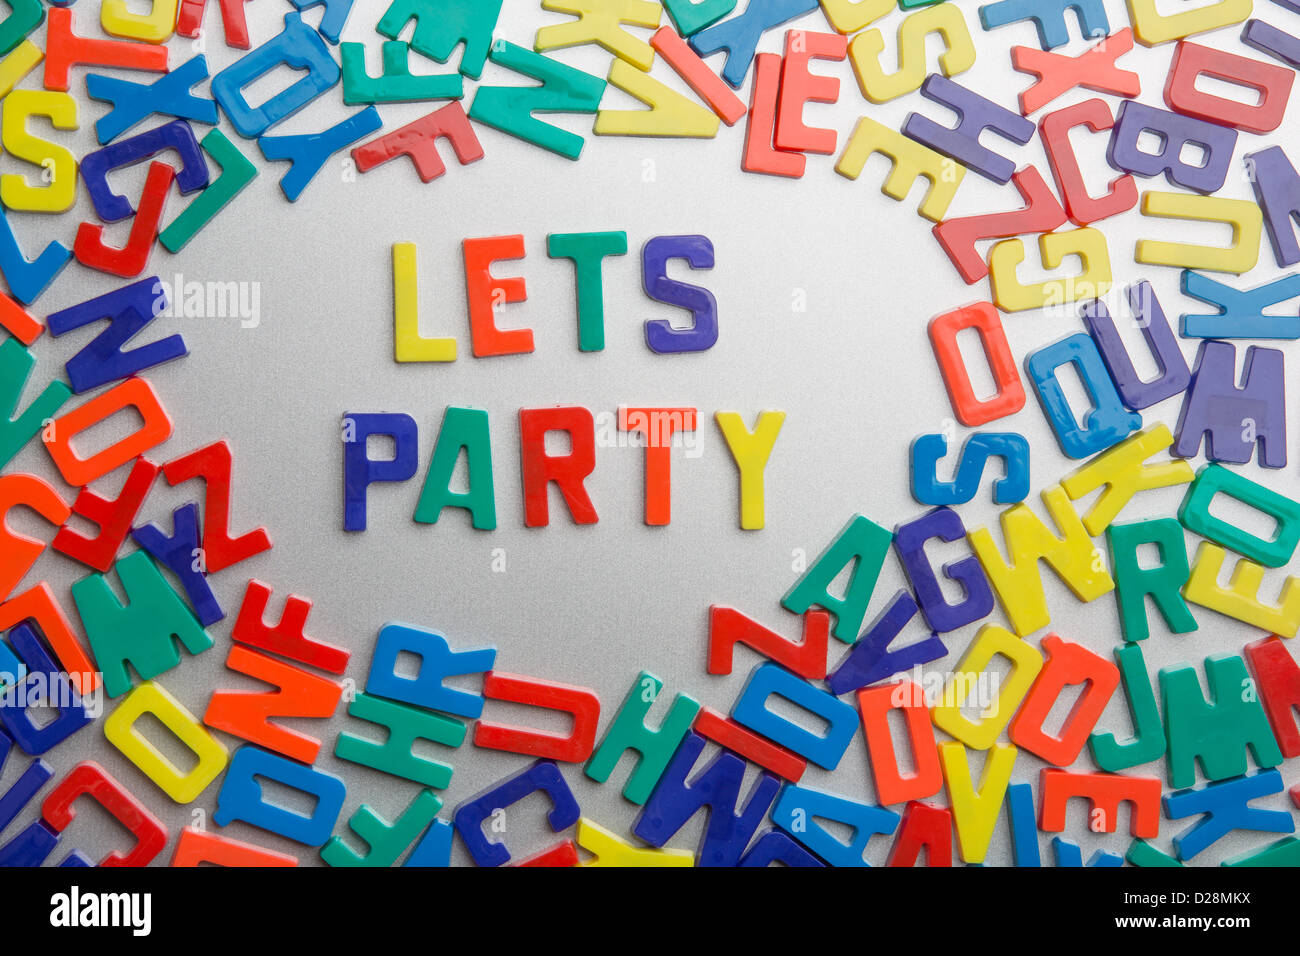 'Let's Party' - Refrigerator magnets spell messages out of a jumble of letters Stock Photo